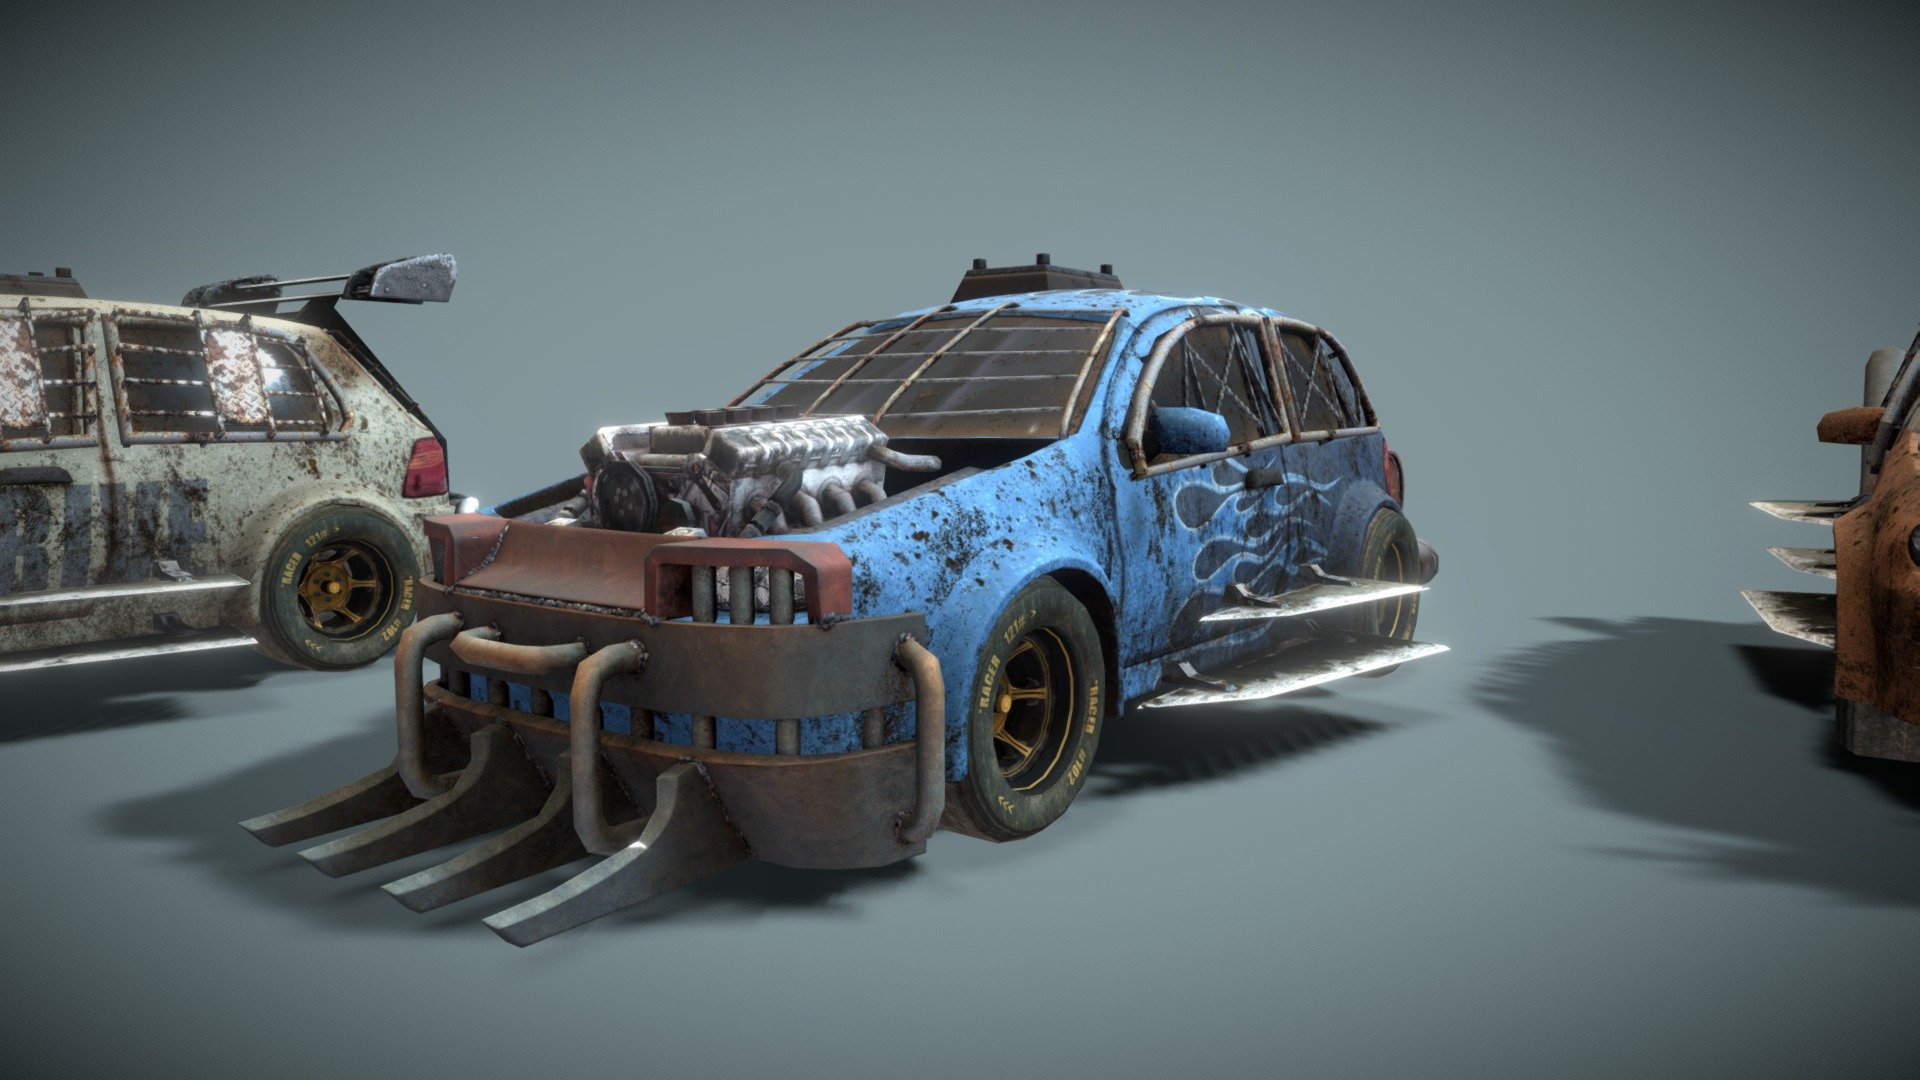 Lowpoly GameReady
parts:
-6 carpaints
-4 frontbumpers
-4 backbumpers
-2 sidekits
-4 hoods
-3 windshields

textures: 
color, specular, metallic, reflection, normal - Customizable Post-Apocalyptic car - Golf - 3D model by MadManStudio 3d model